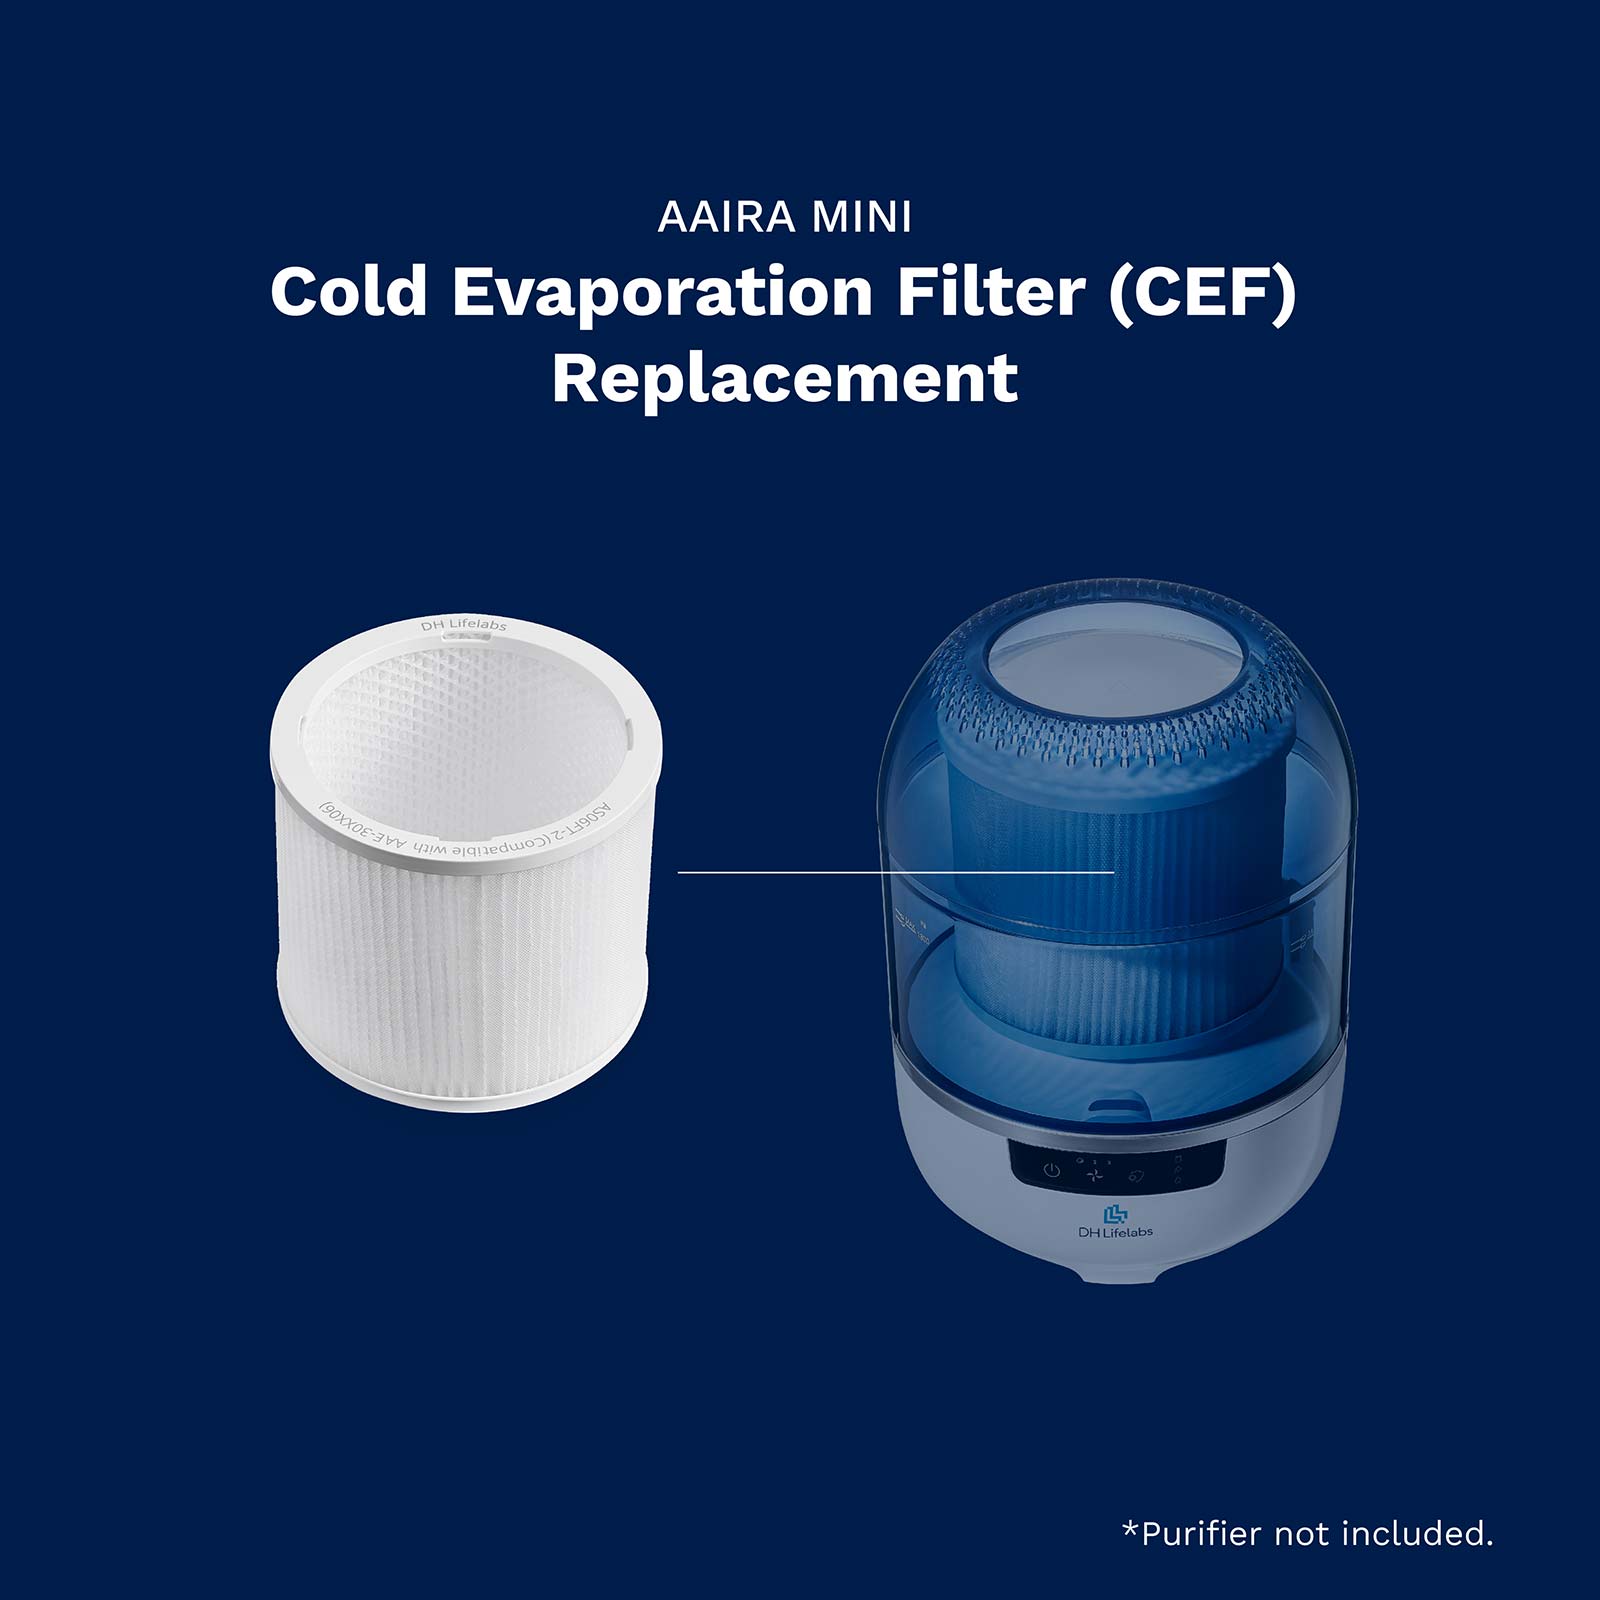 Cold Evaporation Replacement Filter for Aaira Mini